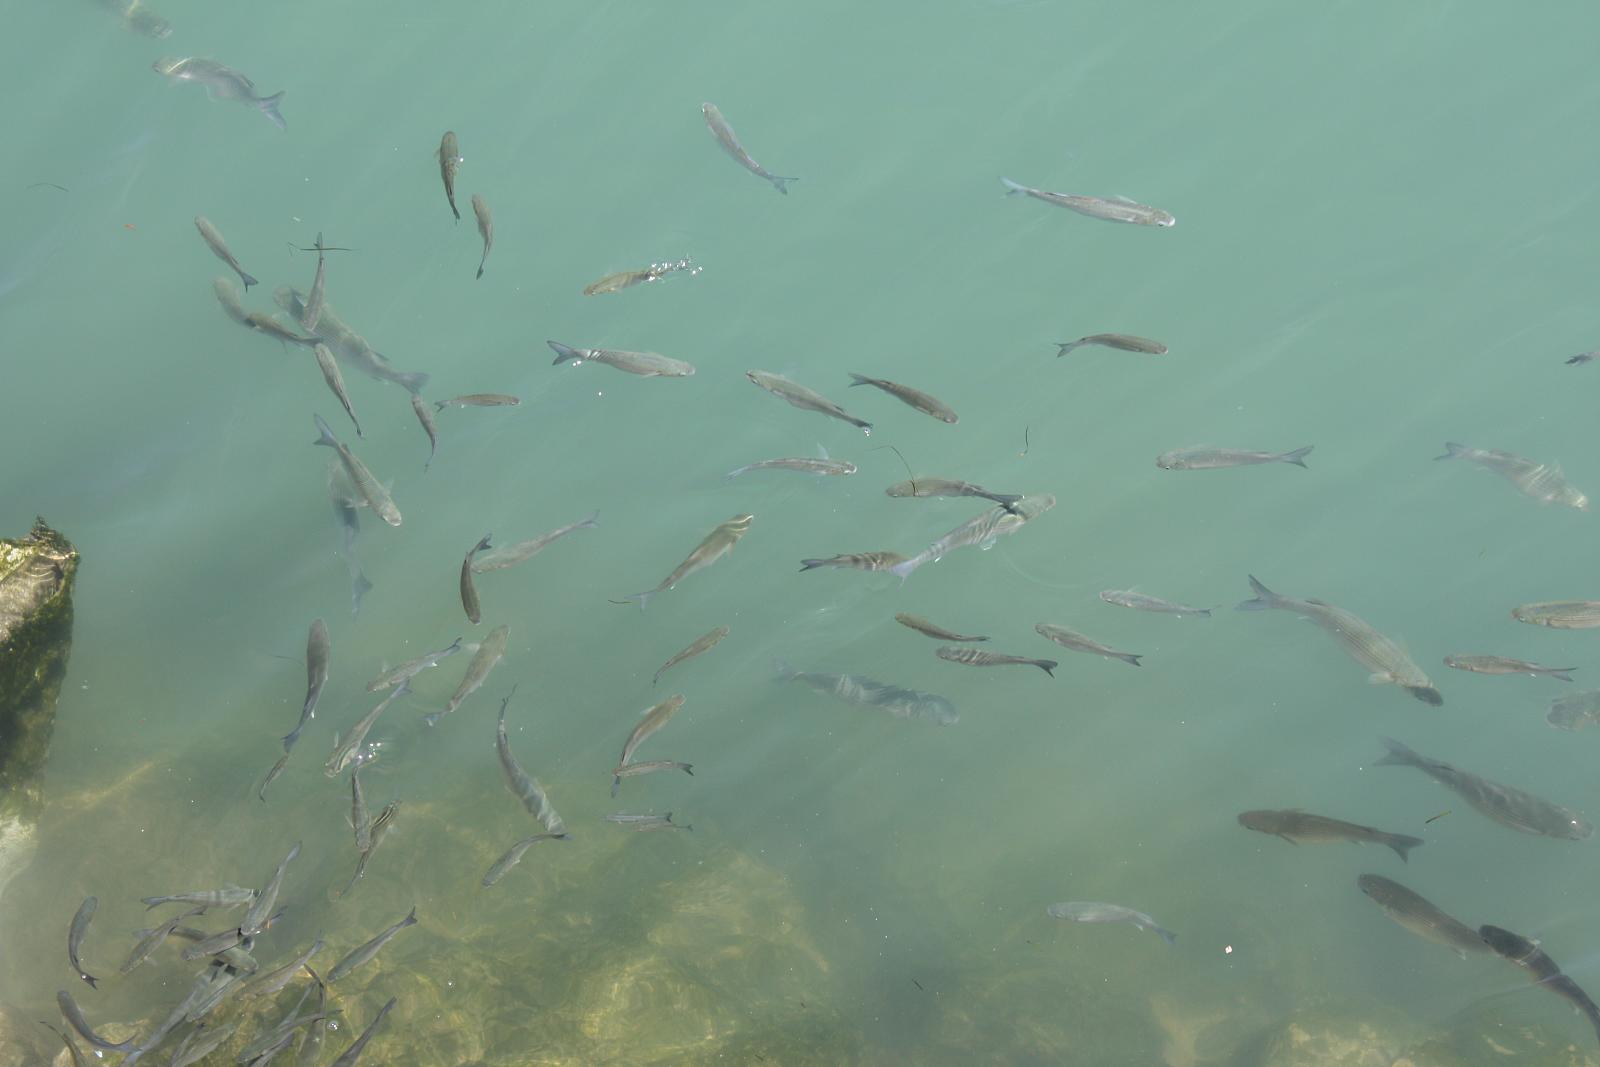 many fish floating in the water near a concrete pier